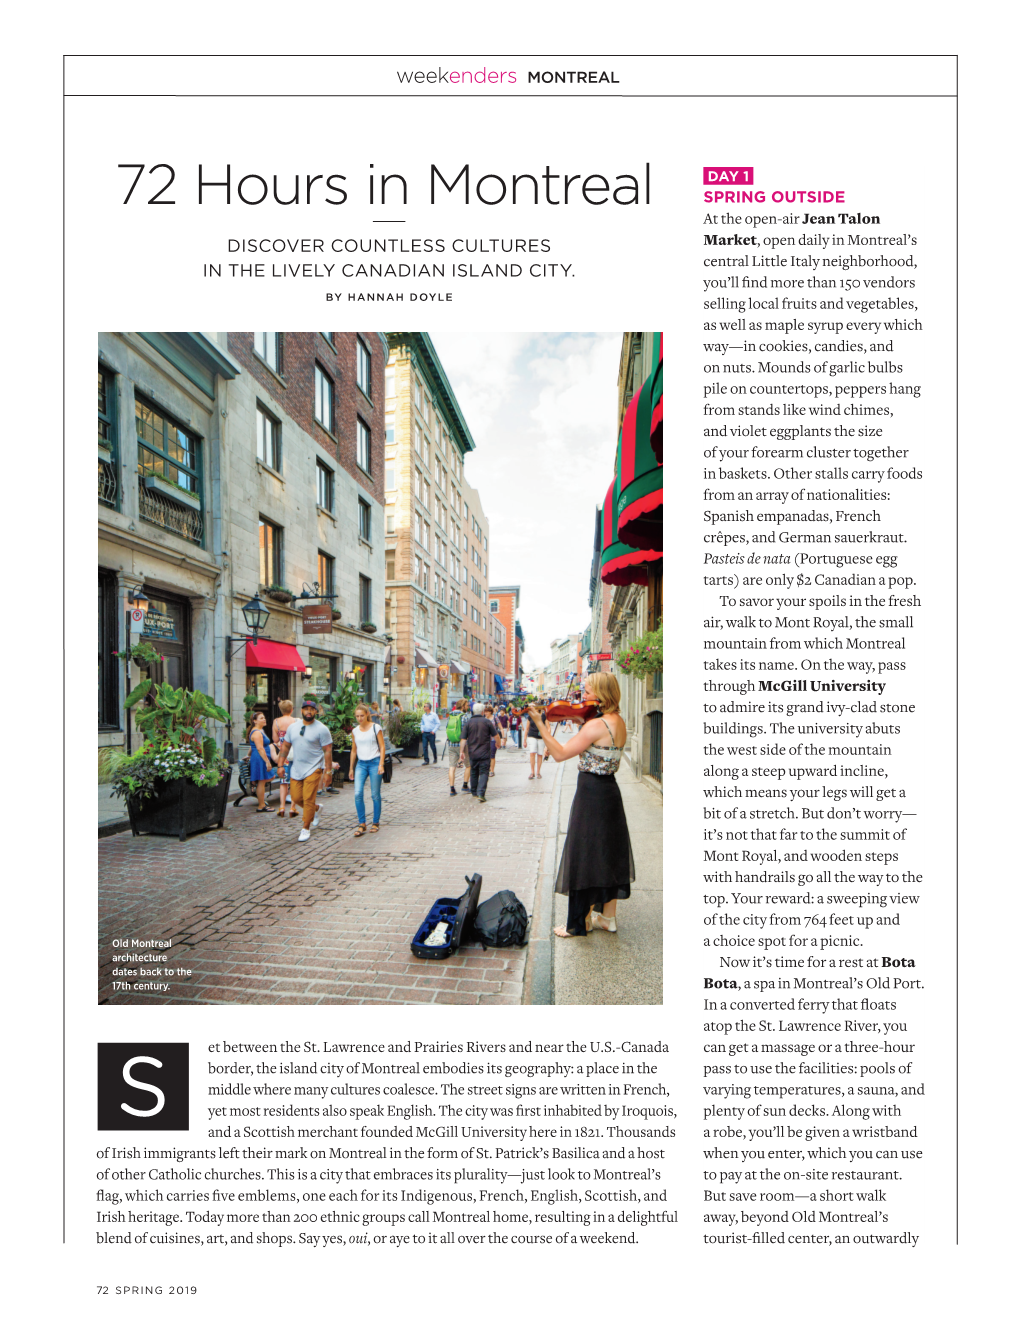 72 Hours in Montreal